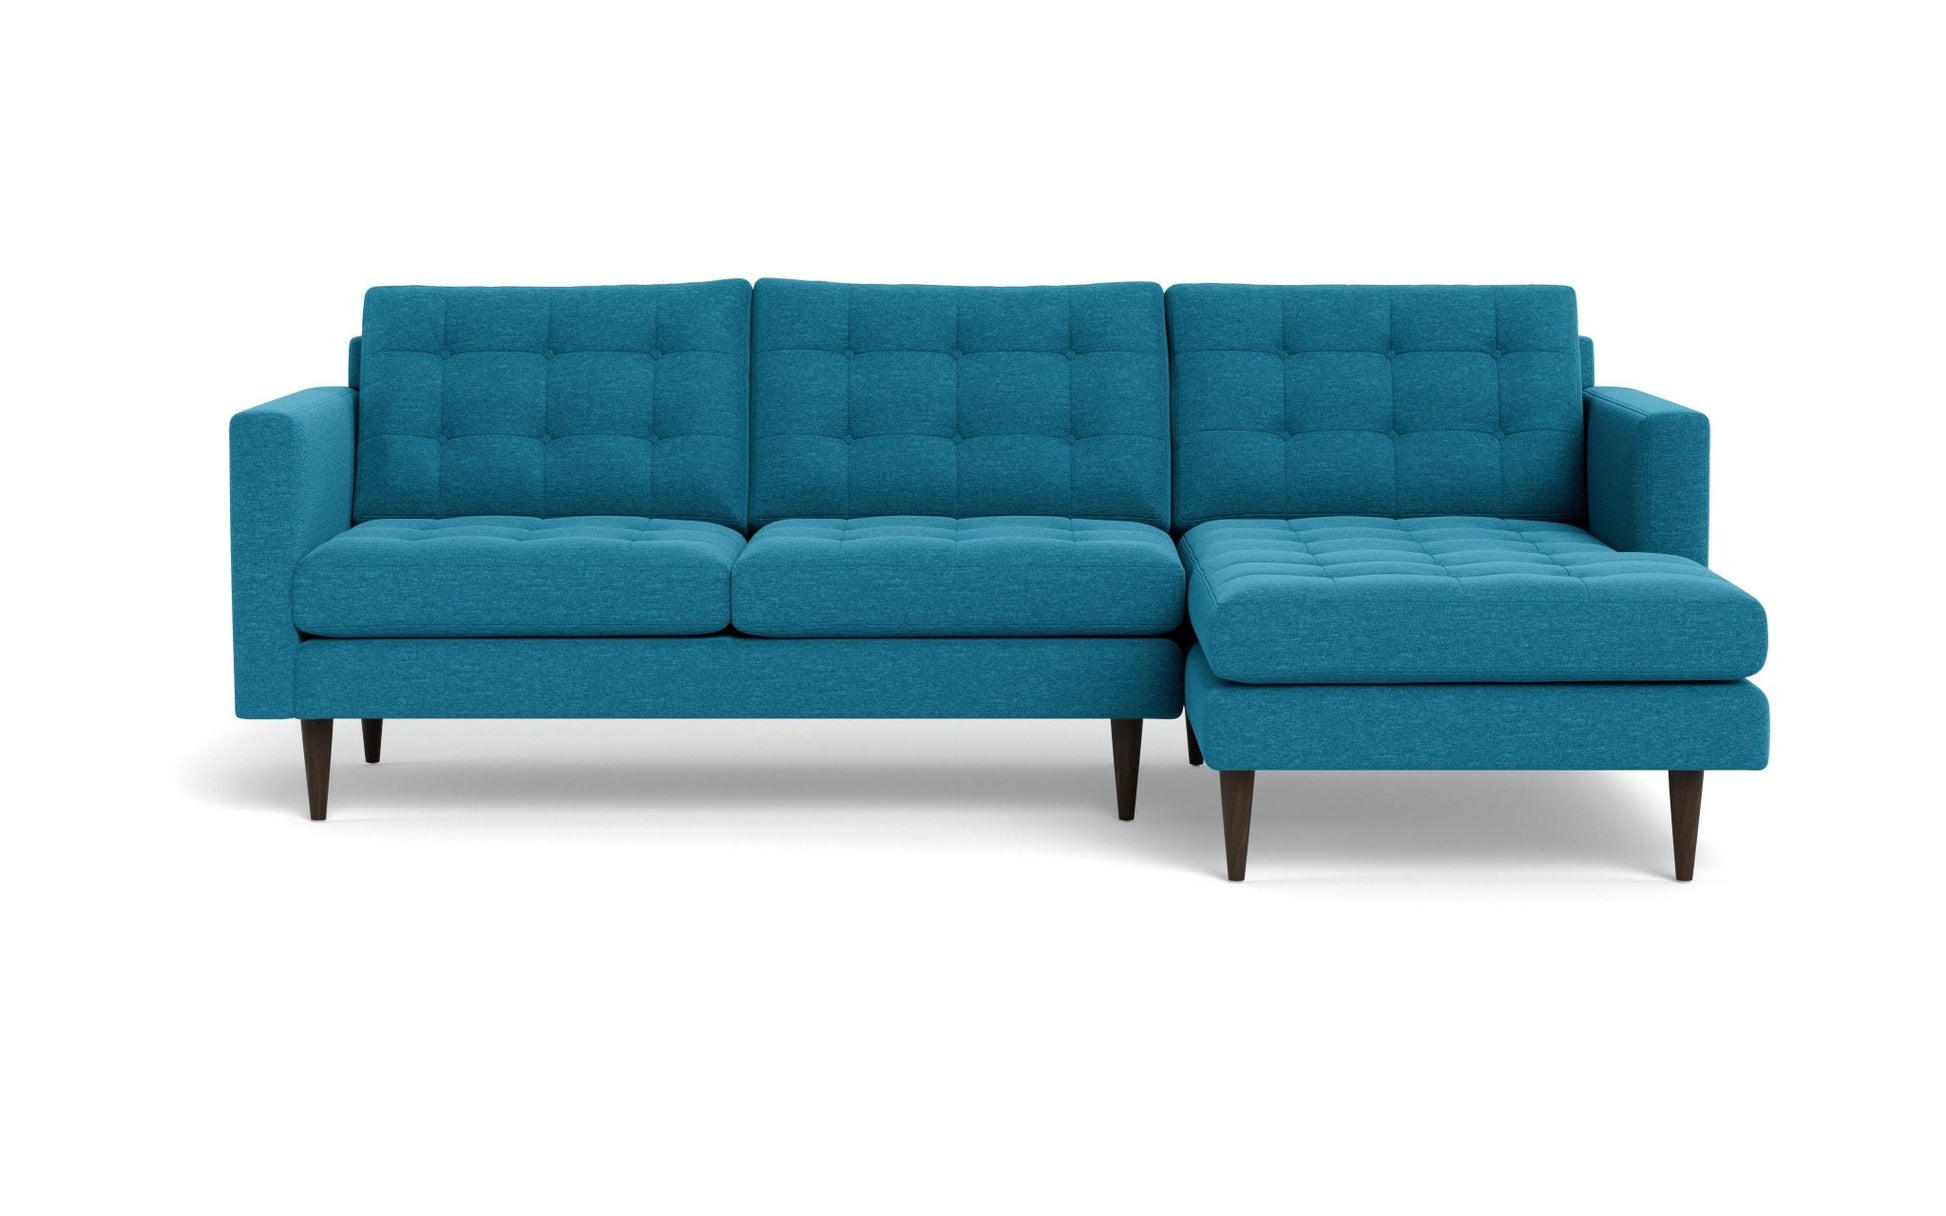 Wallace Right Chaise Sectional - Bennett Peacock